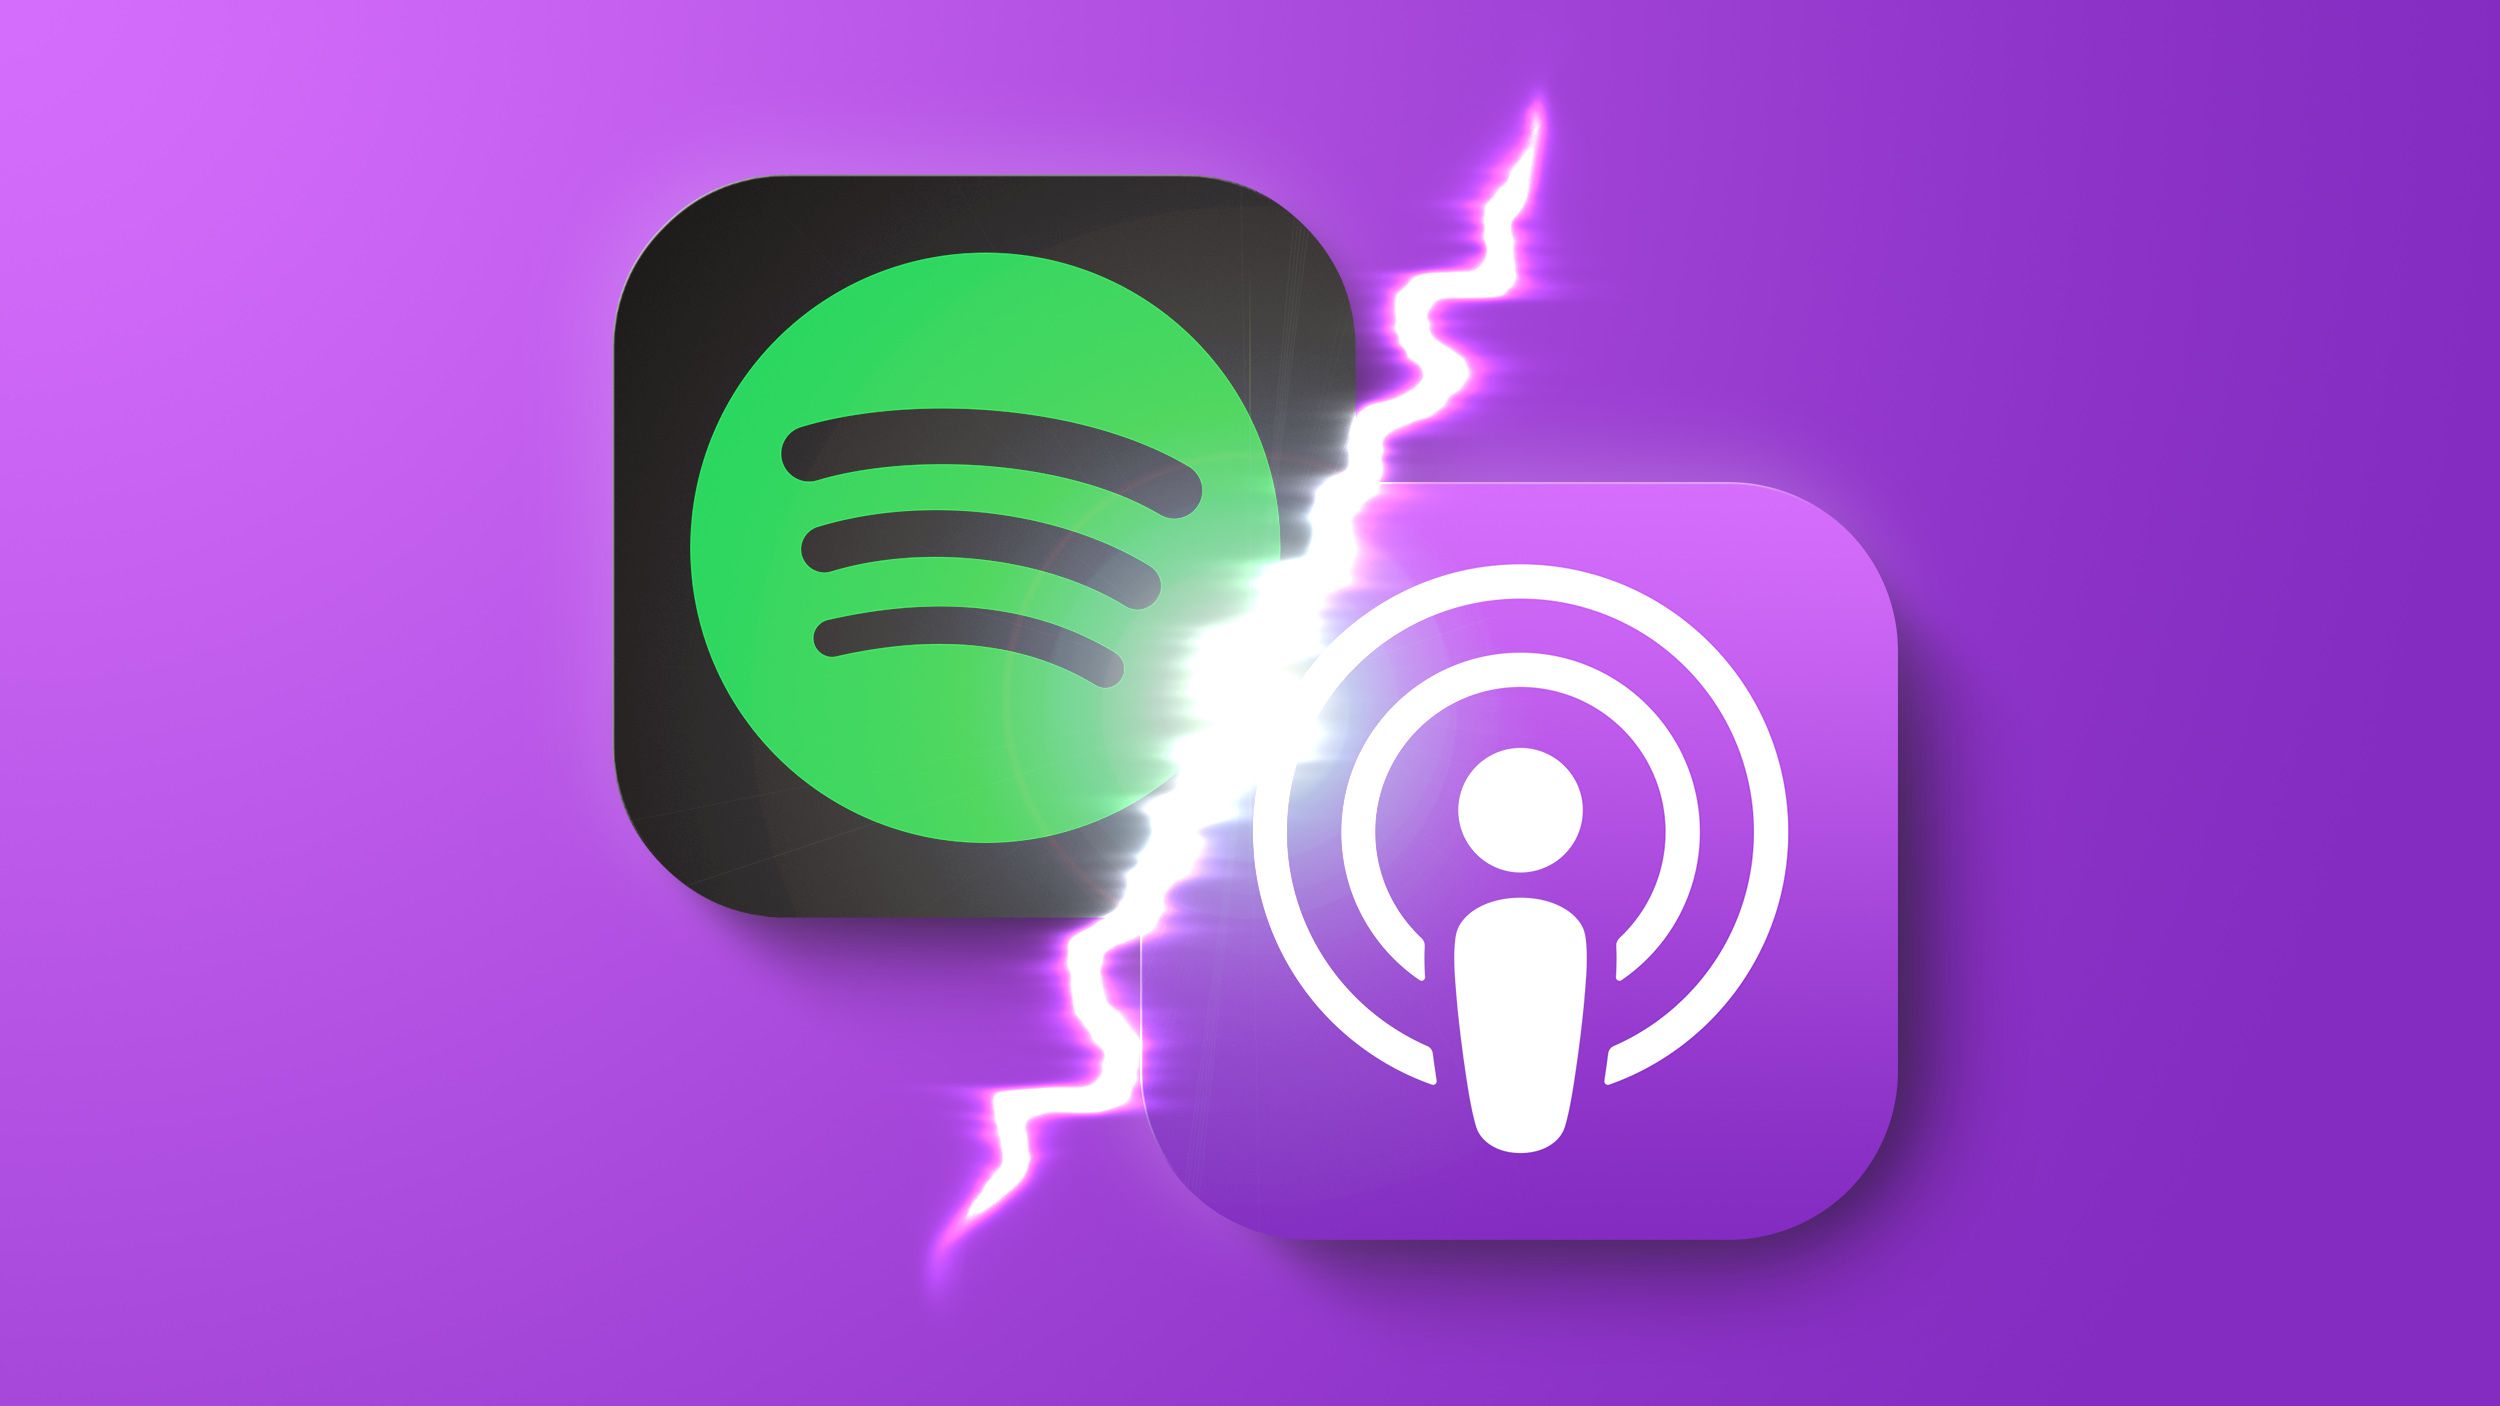 Spotify Poised to Surpass Apple Podcasts in U.S. Listeners This Year